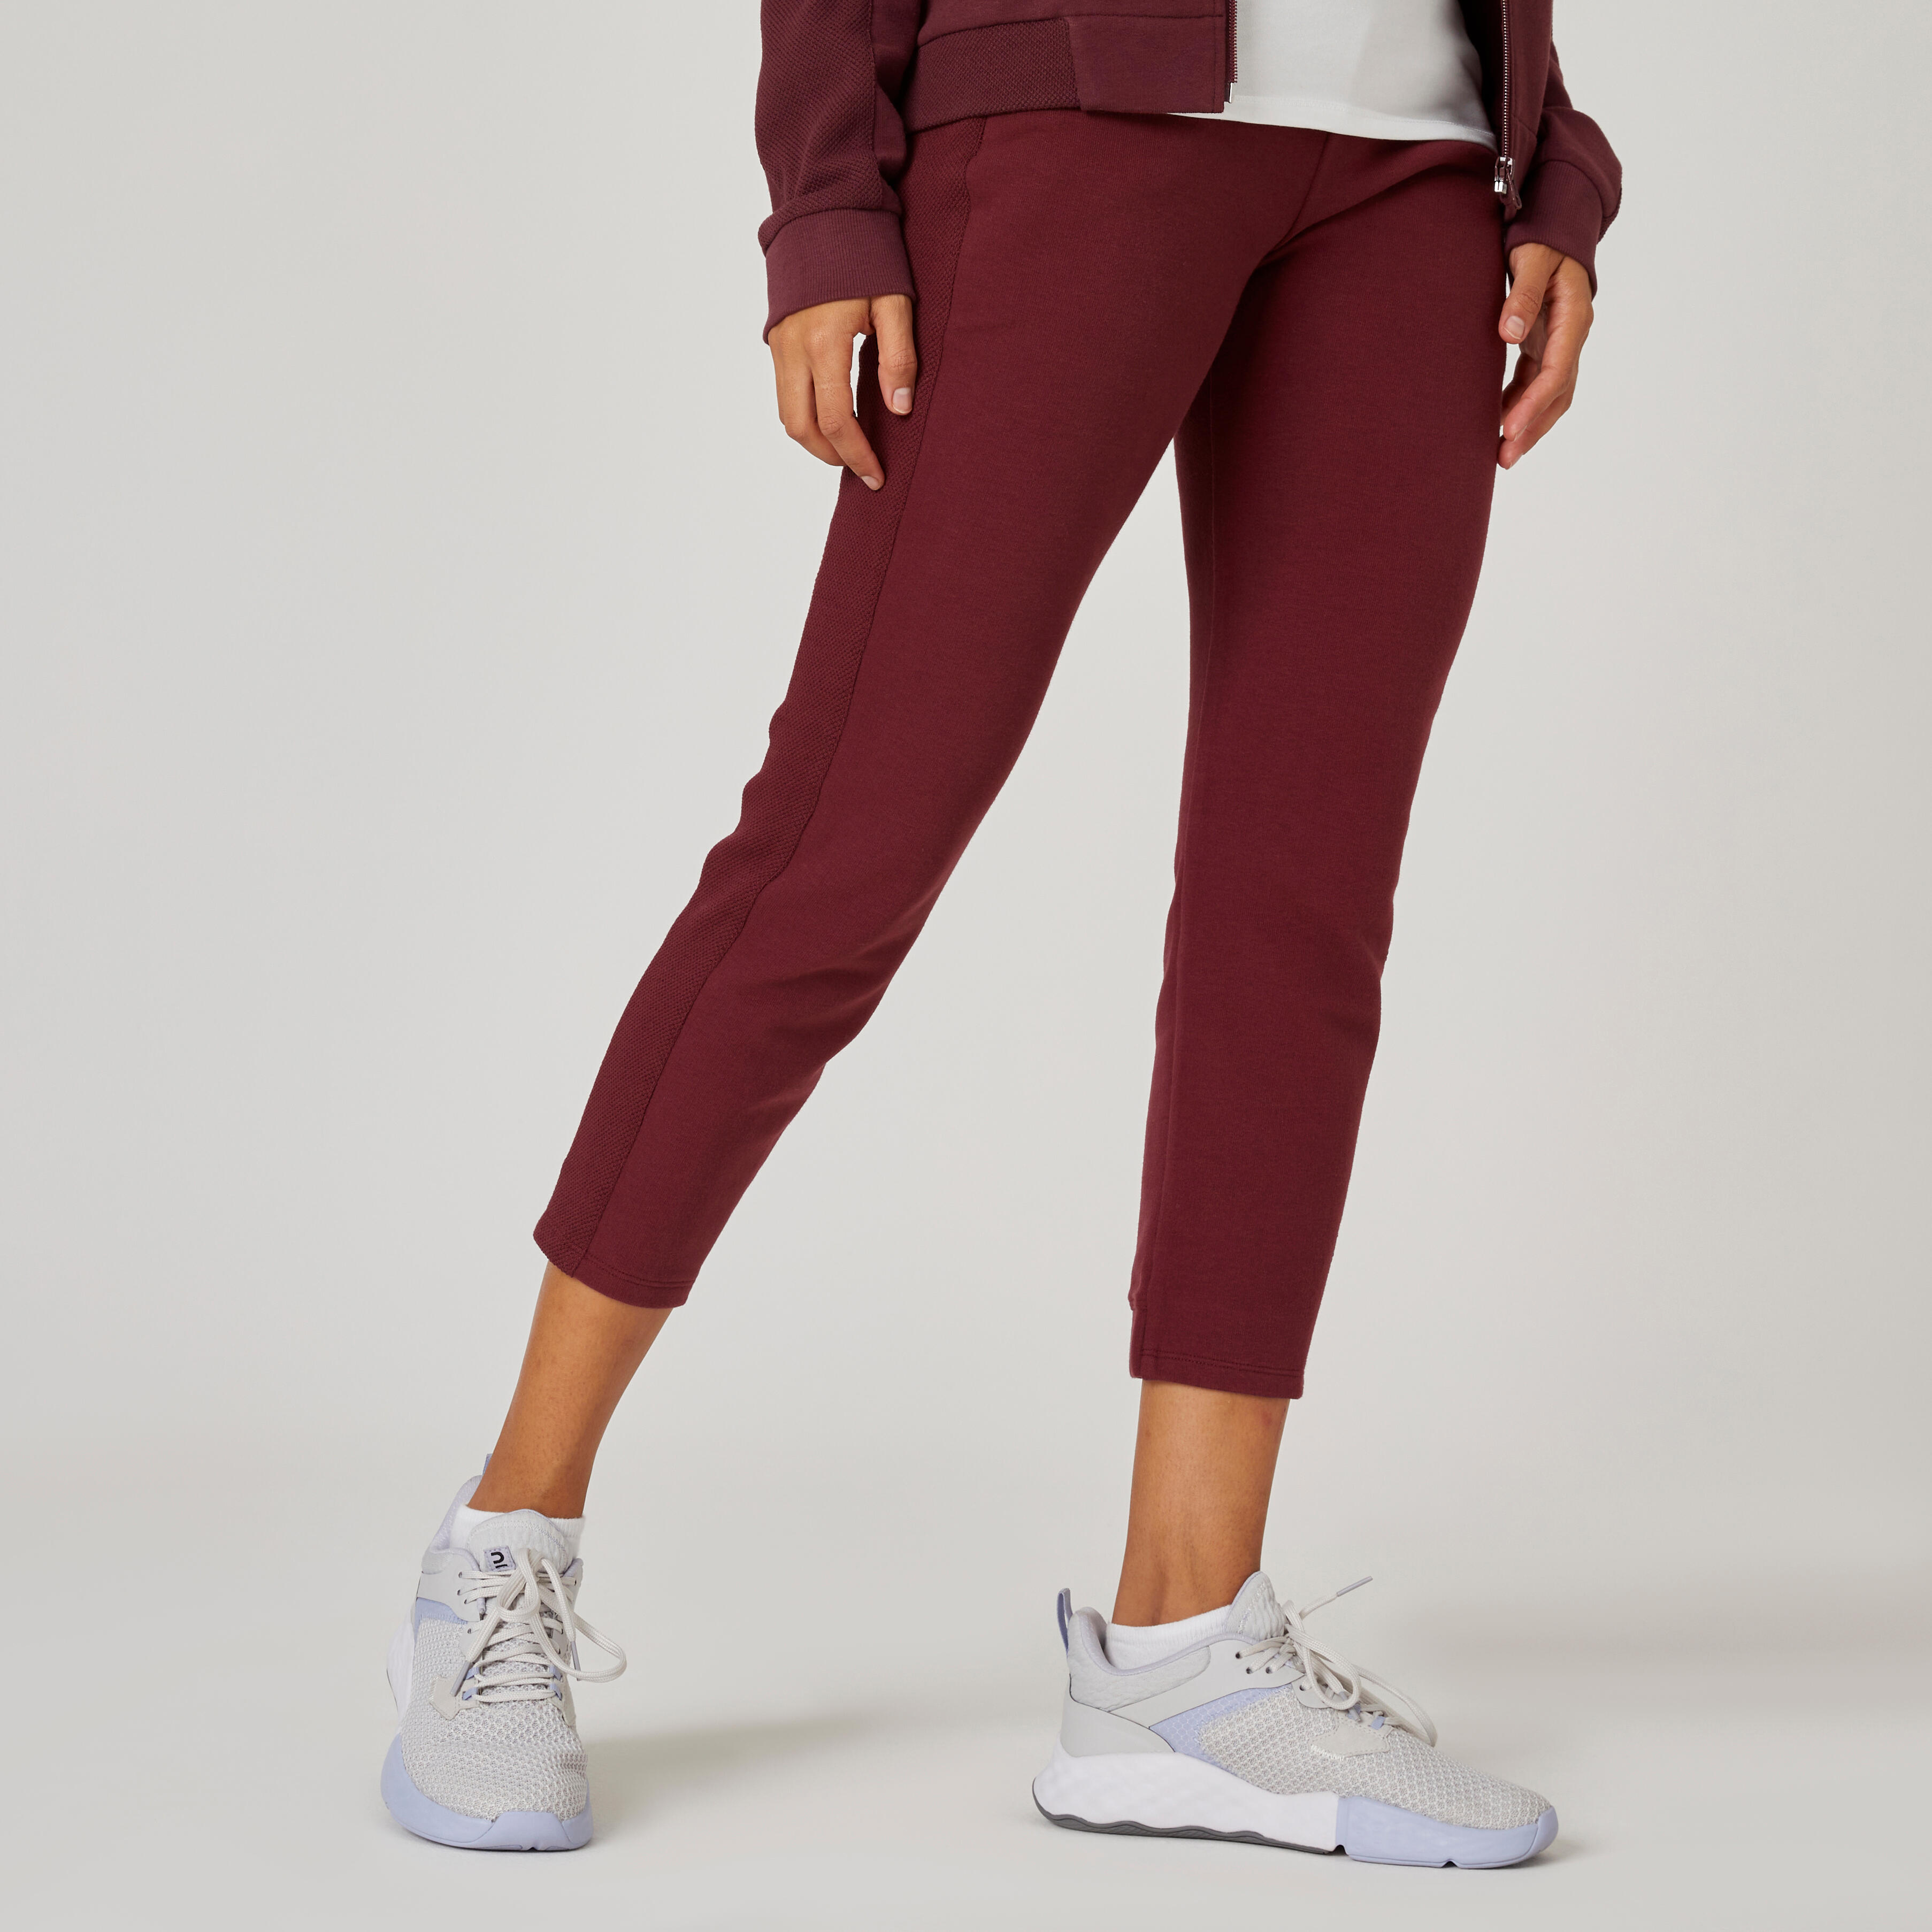 Strong  Free Athletic Pants  More Color Options  GTF Outside